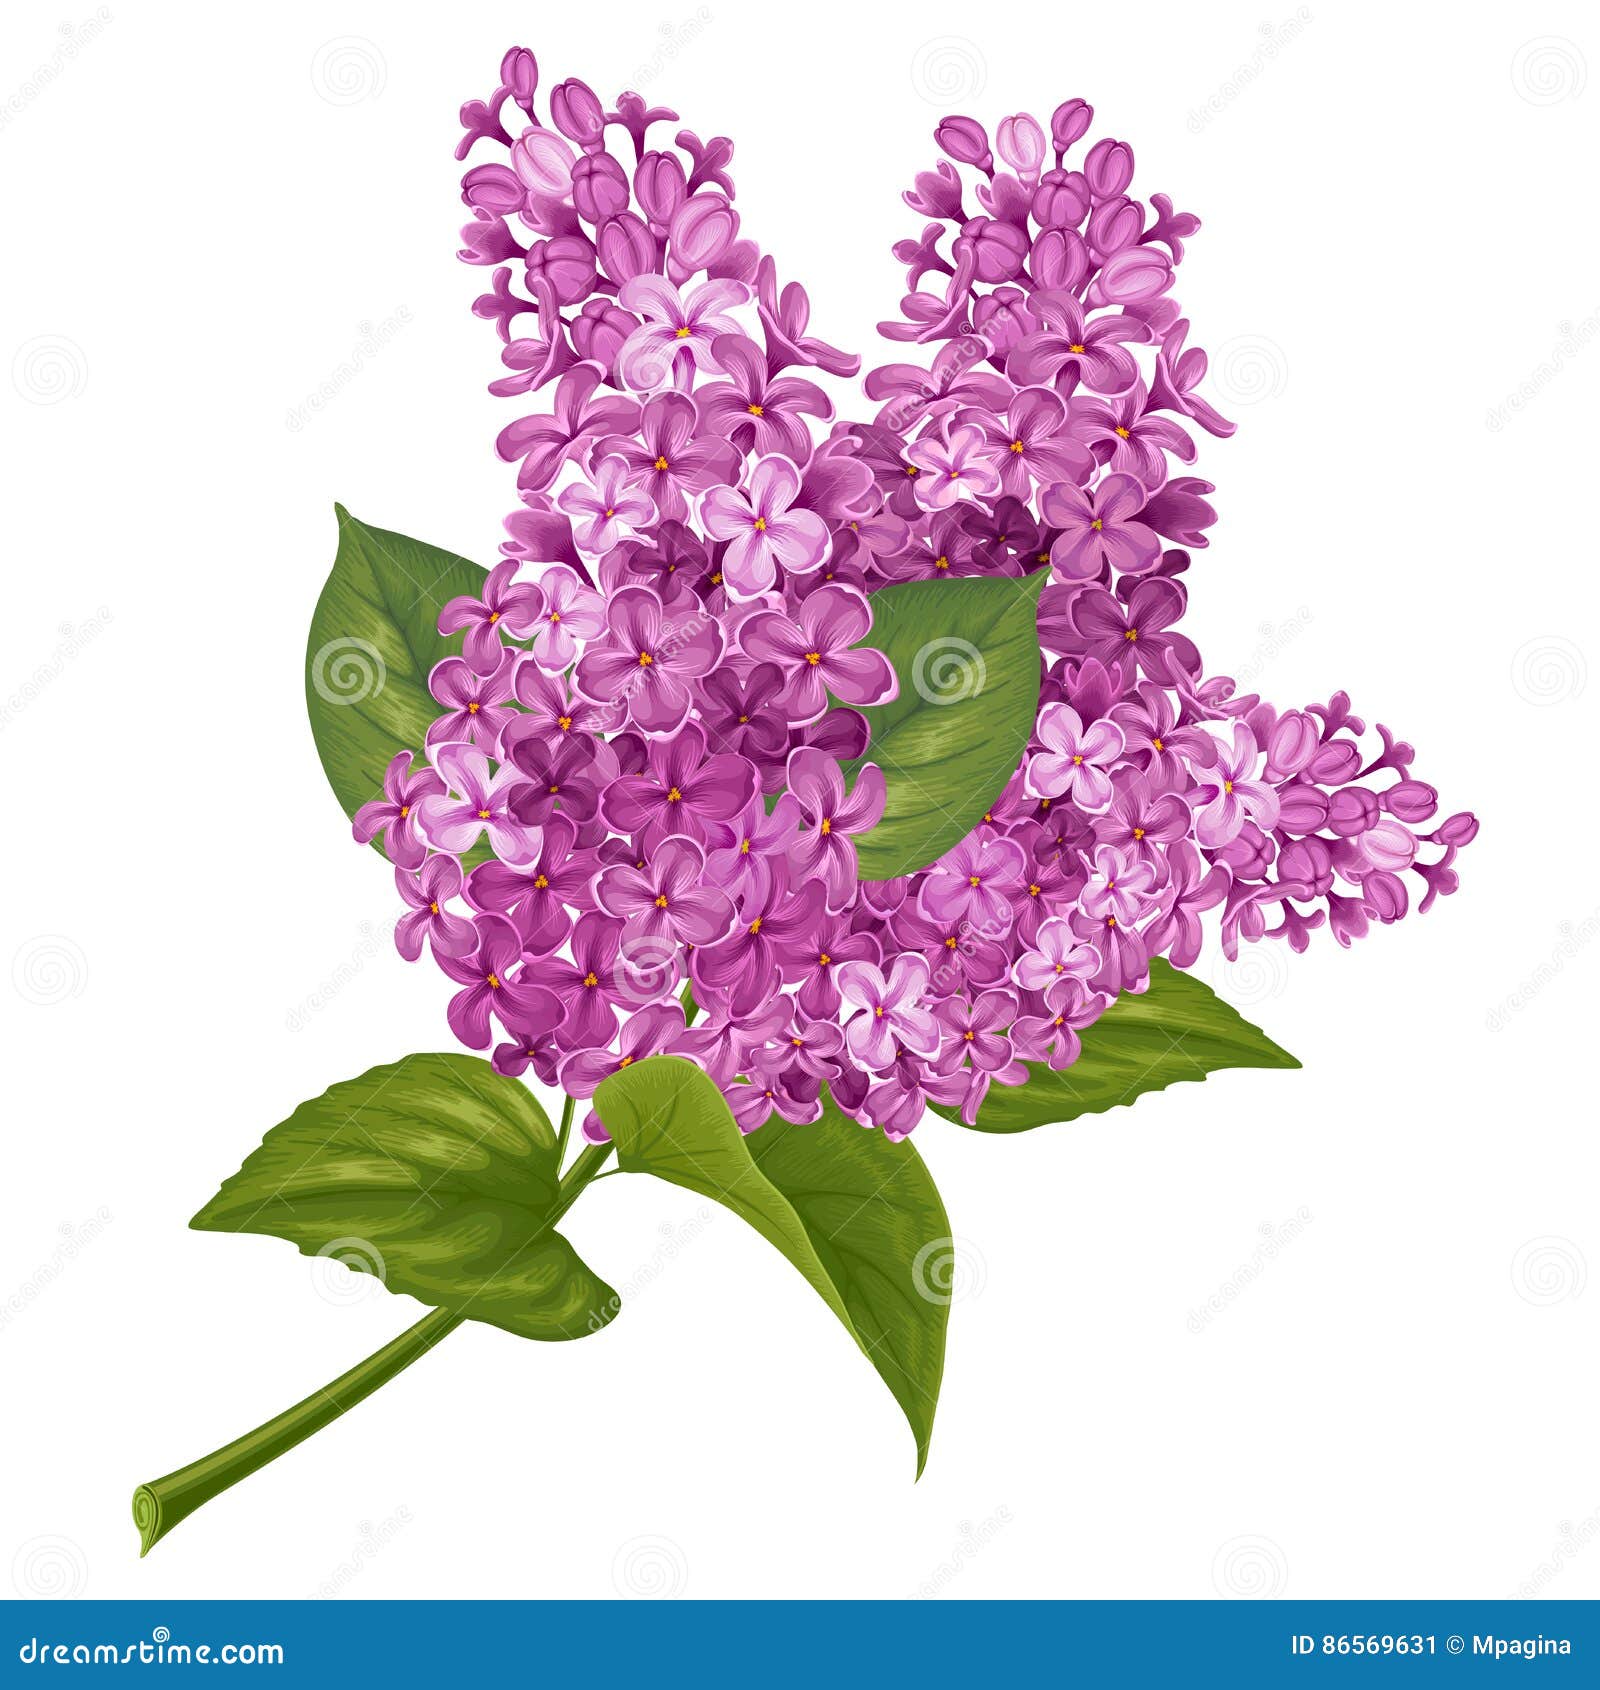 Branch of lilac stock vector. Illustration of hand, label - 86569631